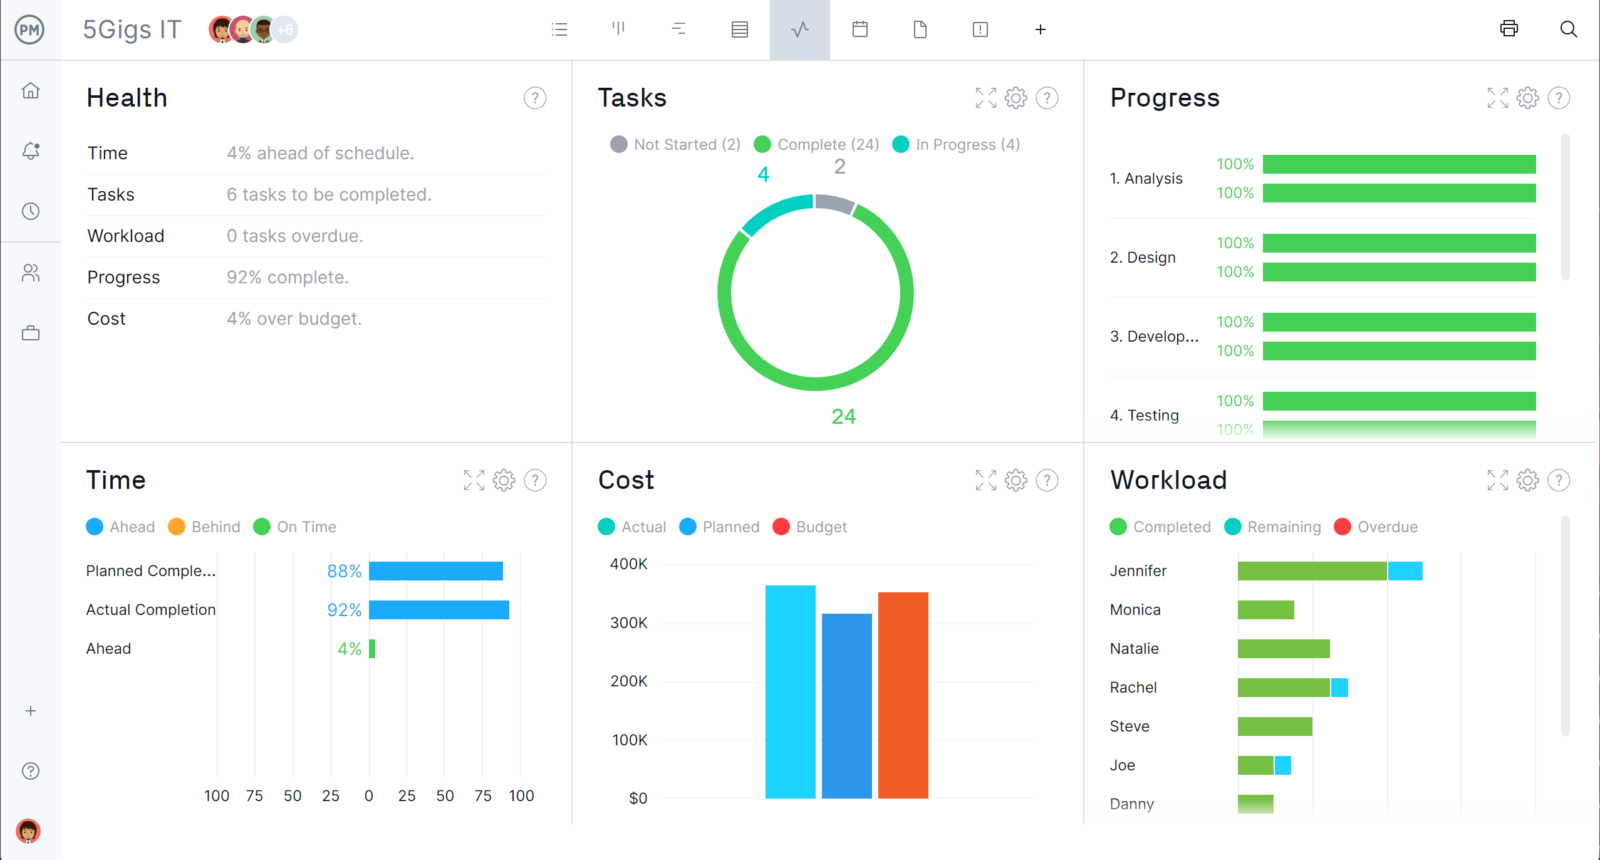 ProjectManager's dashboard in light mode